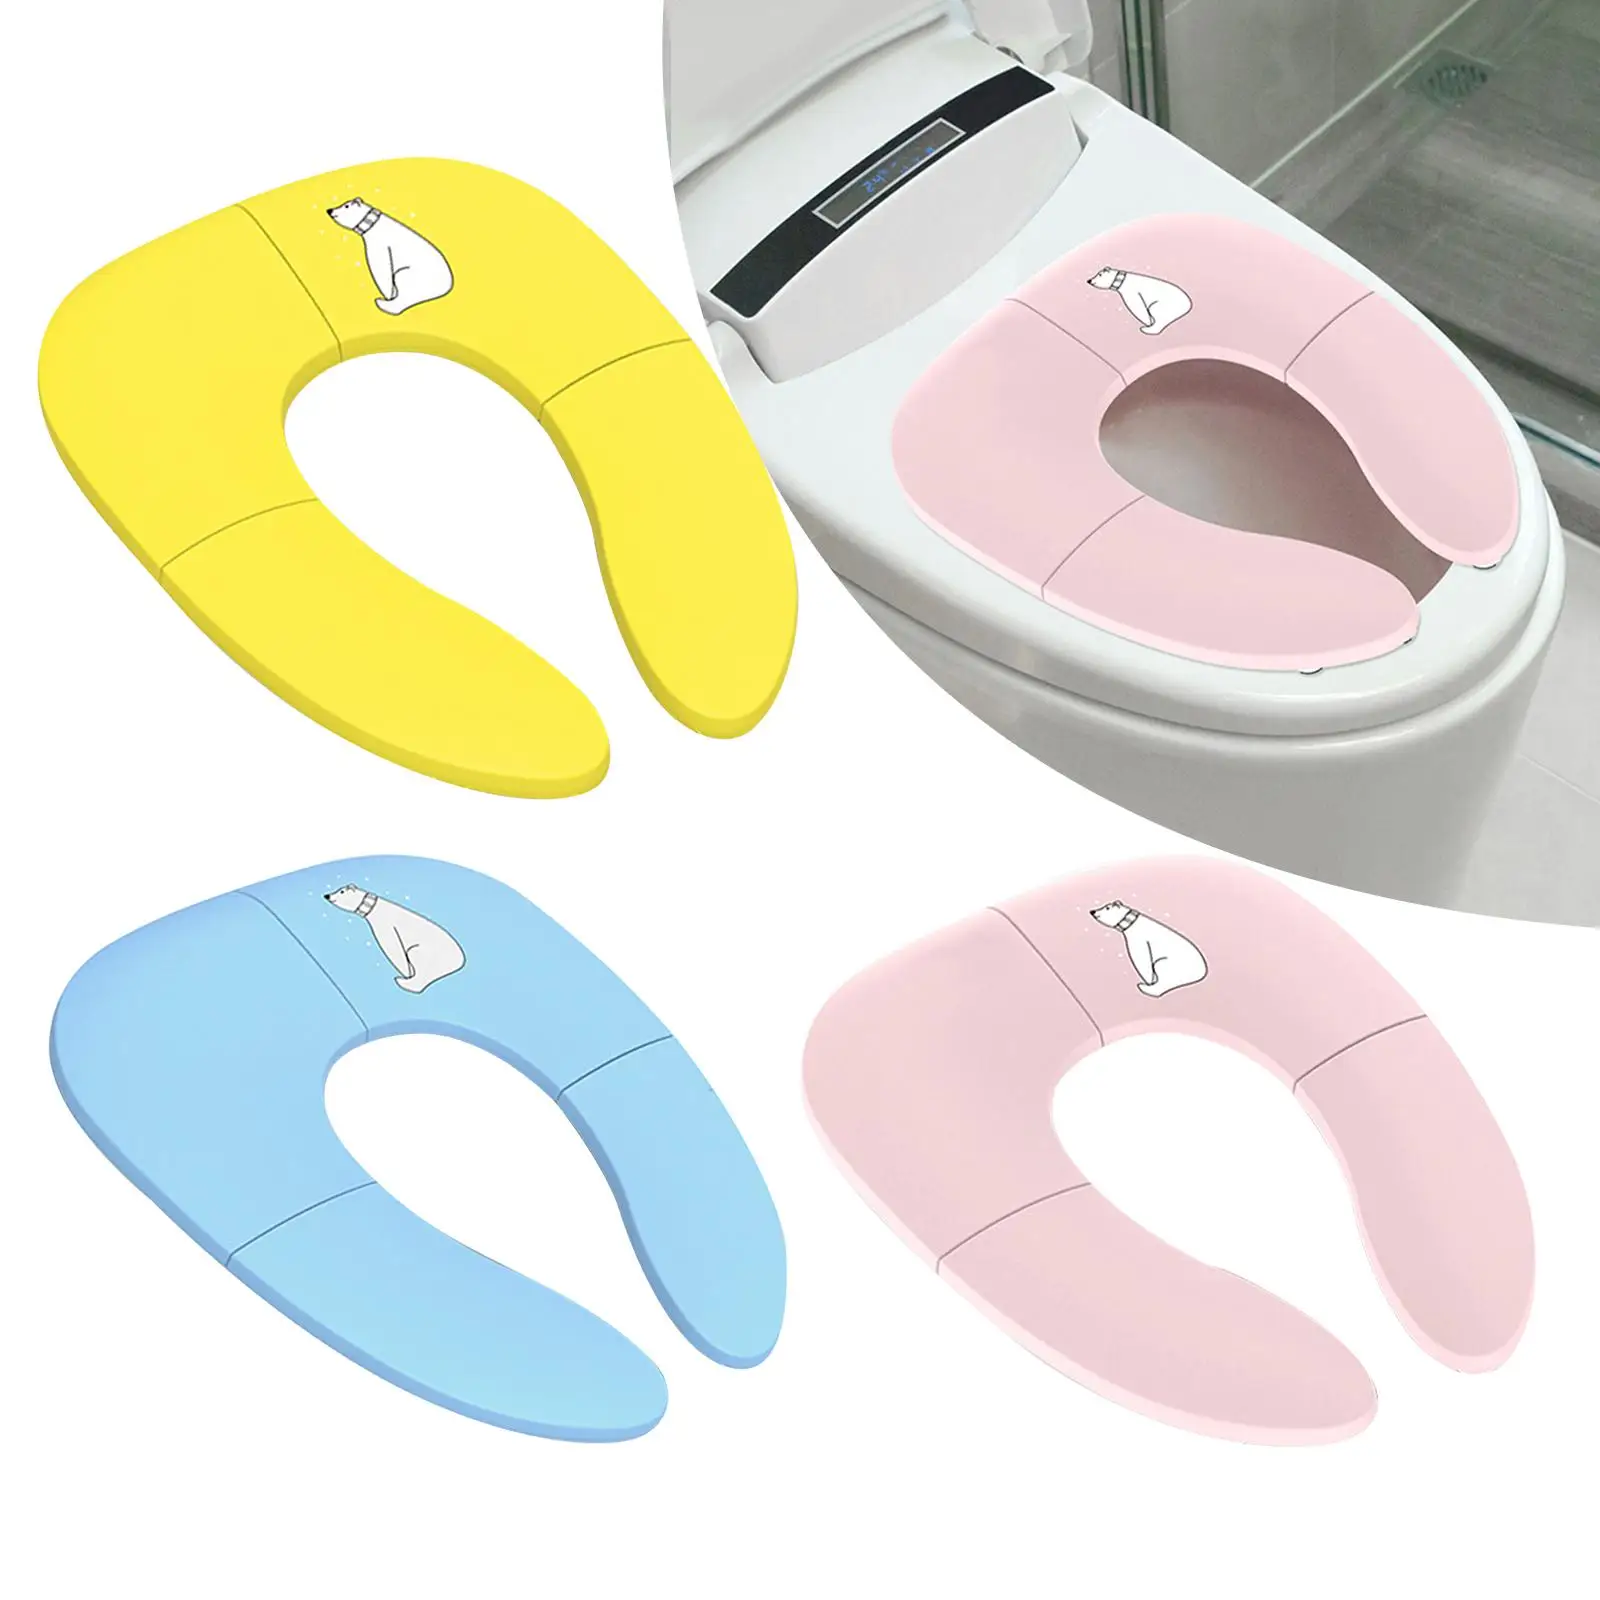 Folding Toilet Seat Upgraded Potty Ring Toilet pad Toilet Ring for Round and Oval Toilets Travel Toddler Child Adults